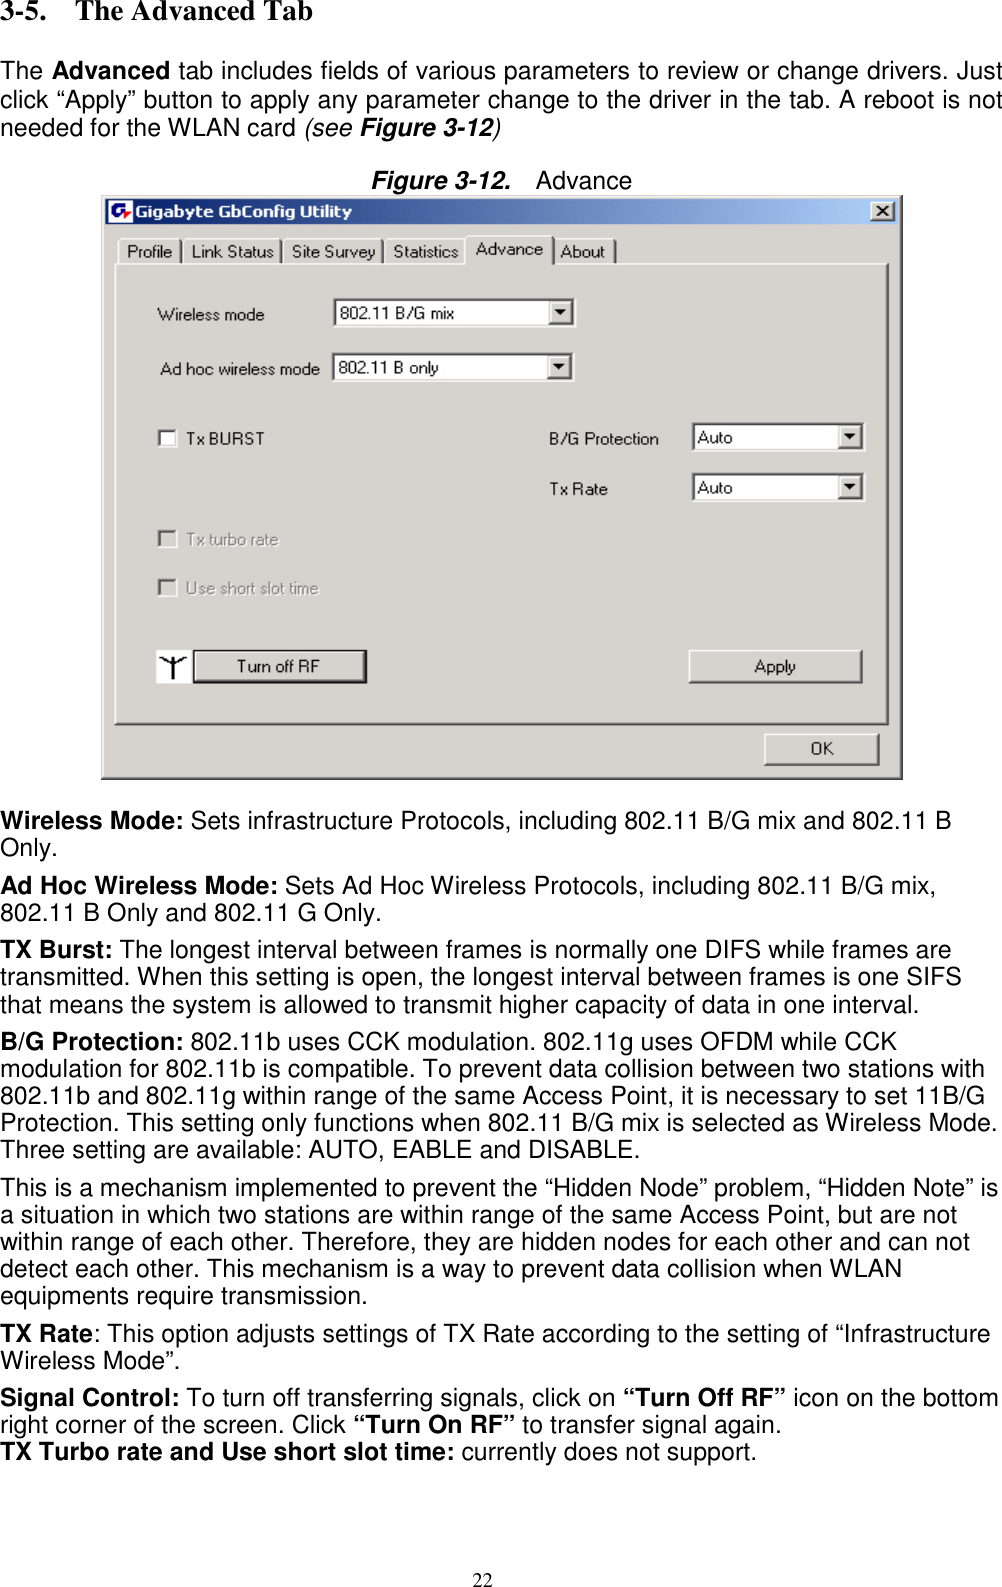 22   3-5. The Advanced Tab  The Advanced tab includes fields of various parameters to review or change drivers. Just click “Apply” button to apply any parameter change to the driver in the tab. A reboot is not needed for the WLAN card (see Figure 3-12)  Figure 3-12.   Advance   Wireless Mode: Sets infrastructure Protocols, including 802.11 B/G mix and 802.11 B Only. Ad Hoc Wireless Mode: Sets Ad Hoc Wireless Protocols, including 802.11 B/G mix, 802.11 B Only and 802.11 G Only. TX Burst: The longest interval between frames is normally one DIFS while frames are transmitted. When this setting is open, the longest interval between frames is one SIFS that means the system is allowed to transmit higher capacity of data in one interval. B/G Protection: 802.11b uses CCK modulation. 802.11g uses OFDM while CCK modulation for 802.11b is compatible. To prevent data collision between two stations with 802.11b and 802.11g within range of the same Access Point, it is necessary to set 11B/G Protection. This setting only functions when 802.11 B/G mix is selected as Wireless Mode. Three setting are available: AUTO, EABLE and DISABLE. This is a mechanism implemented to prevent the “Hidden Node” problem, “Hidden Note” is a situation in which two stations are within range of the same Access Point, but are not within range of each other. Therefore, they are hidden nodes for each other and can not detect each other. This mechanism is a way to prevent data collision when WLAN equipments require transmission. TX Rate: This option adjusts settings of TX Rate according to the setting of “Infrastructure Wireless Mode”. Signal Control: To turn off transferring signals, click on “Turn Off RF” icon on the bottom right corner of the screen. Click “Turn On RF” to transfer signal again. TX Turbo rate and Use short slot time: currently does not support.   